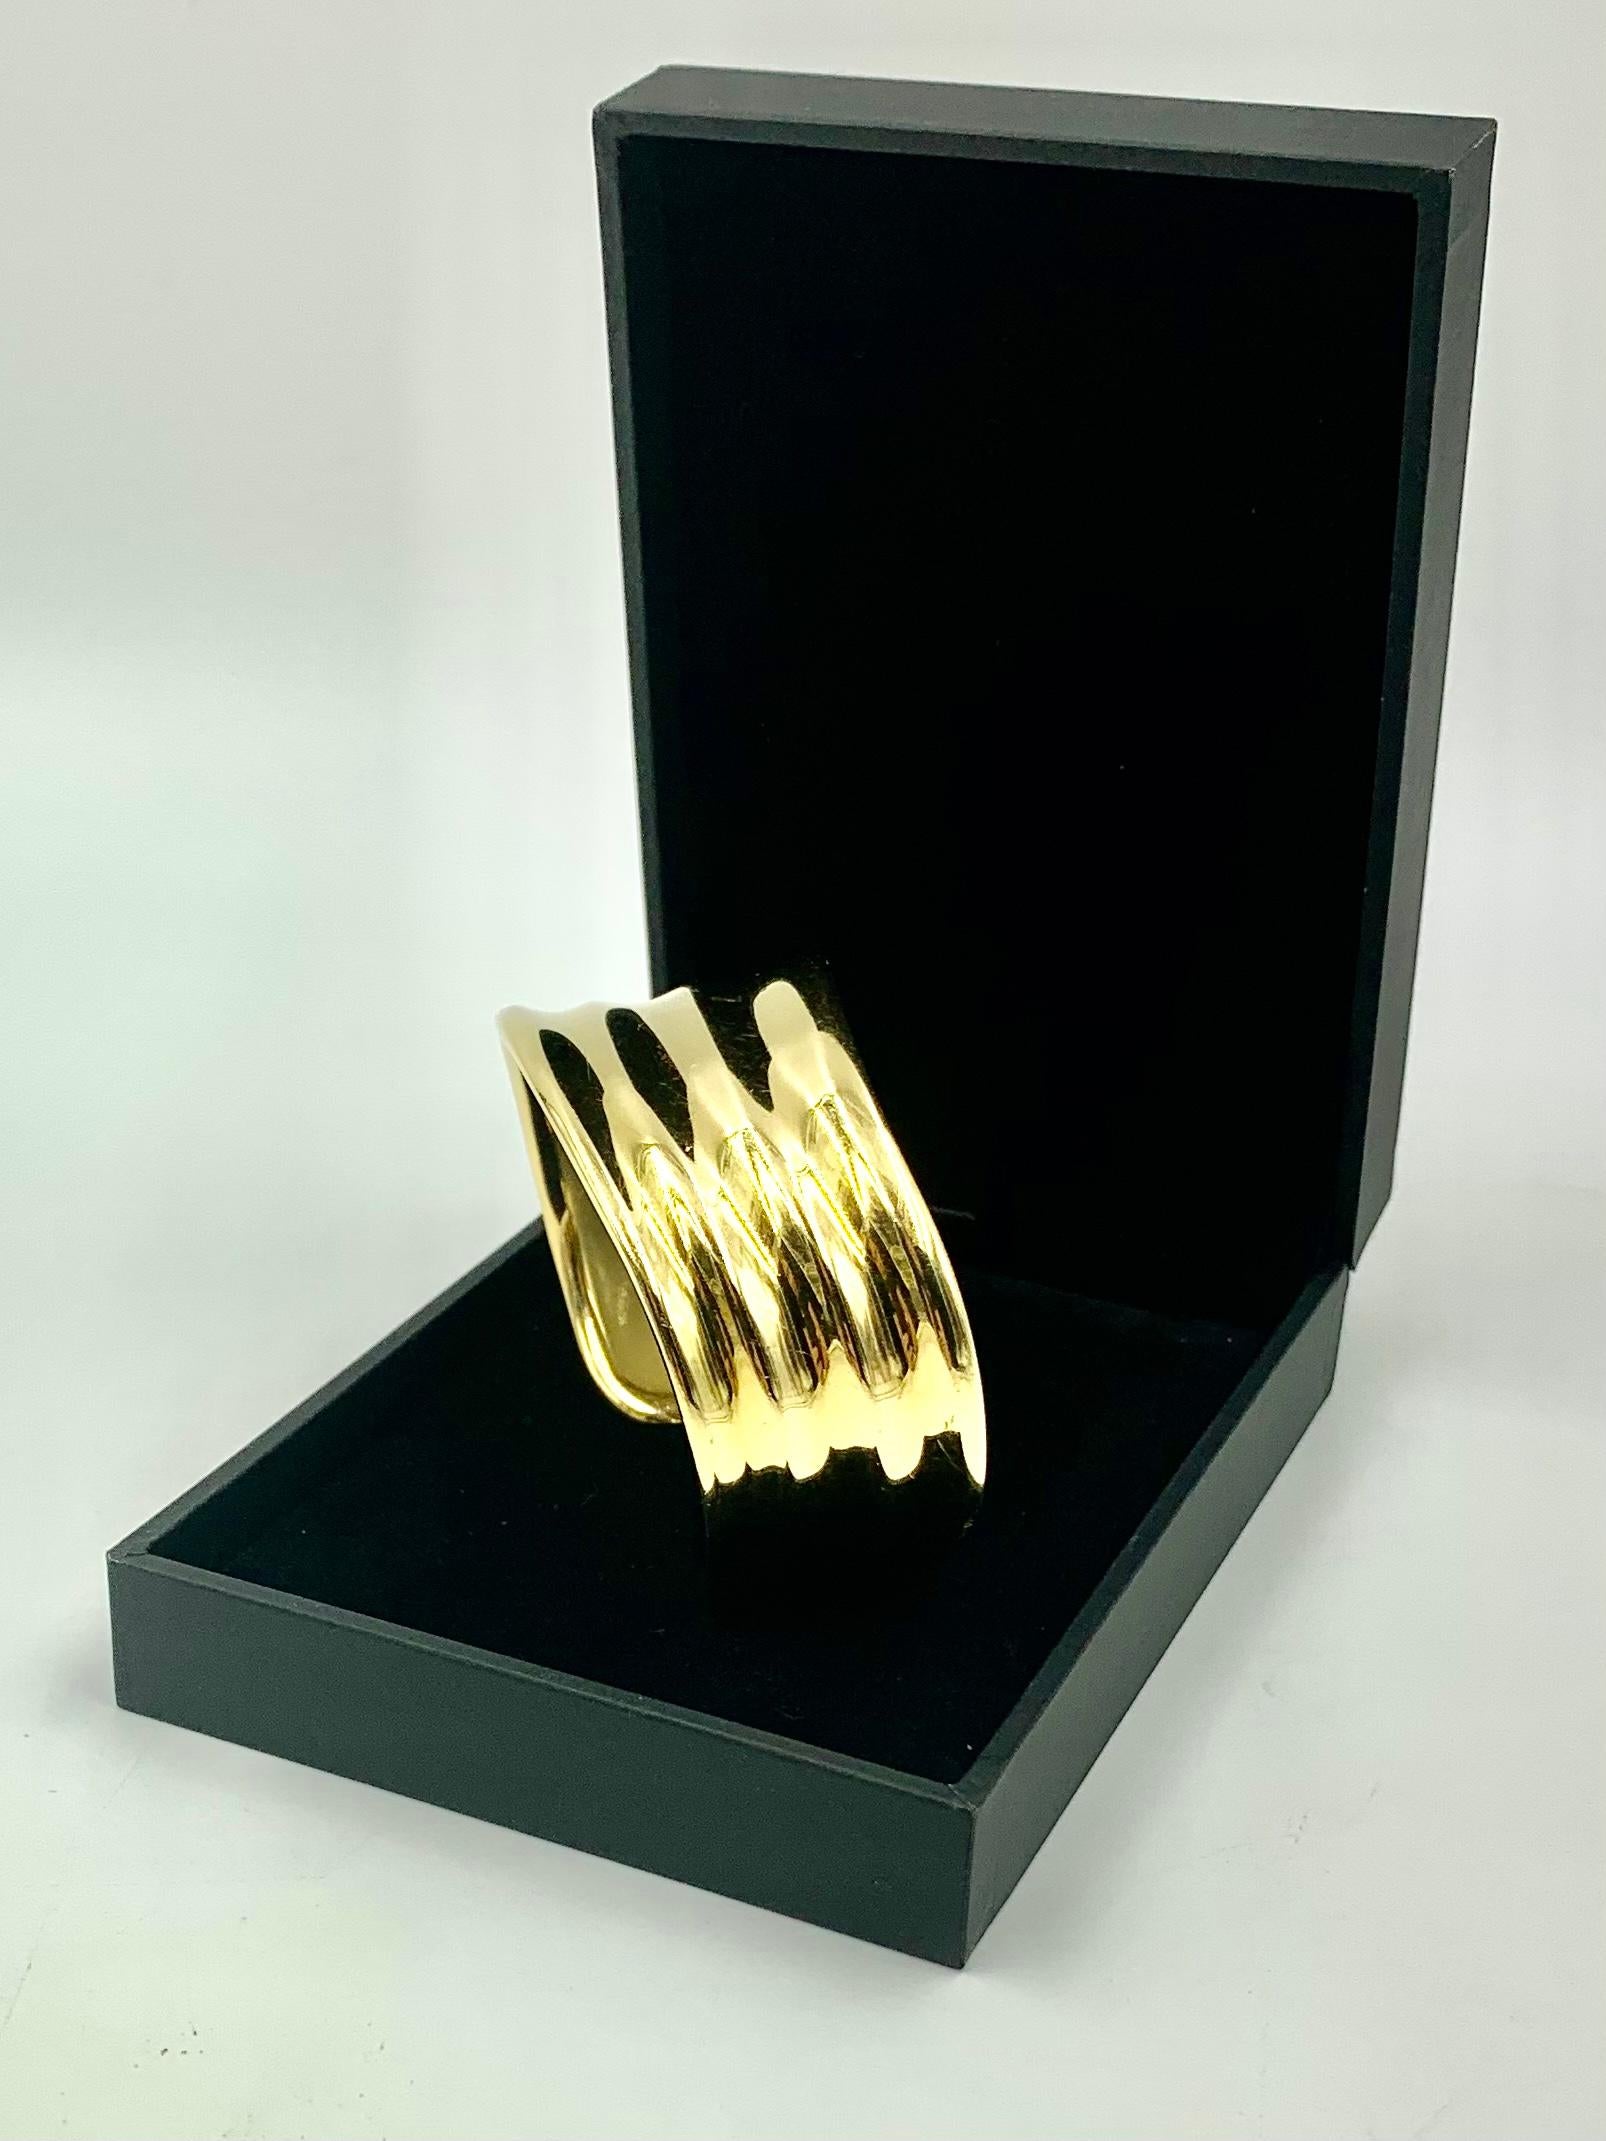 Substantial Georg Jensen Minas Spiridis 18K gold organic form cuff bracelet. The design reminiscent of the gentle waves of the Greek Isles. Wonderfully comfortable, easy fit, a pleasure to wear.
Minas Spiridis was the first non-Scandinavian designer